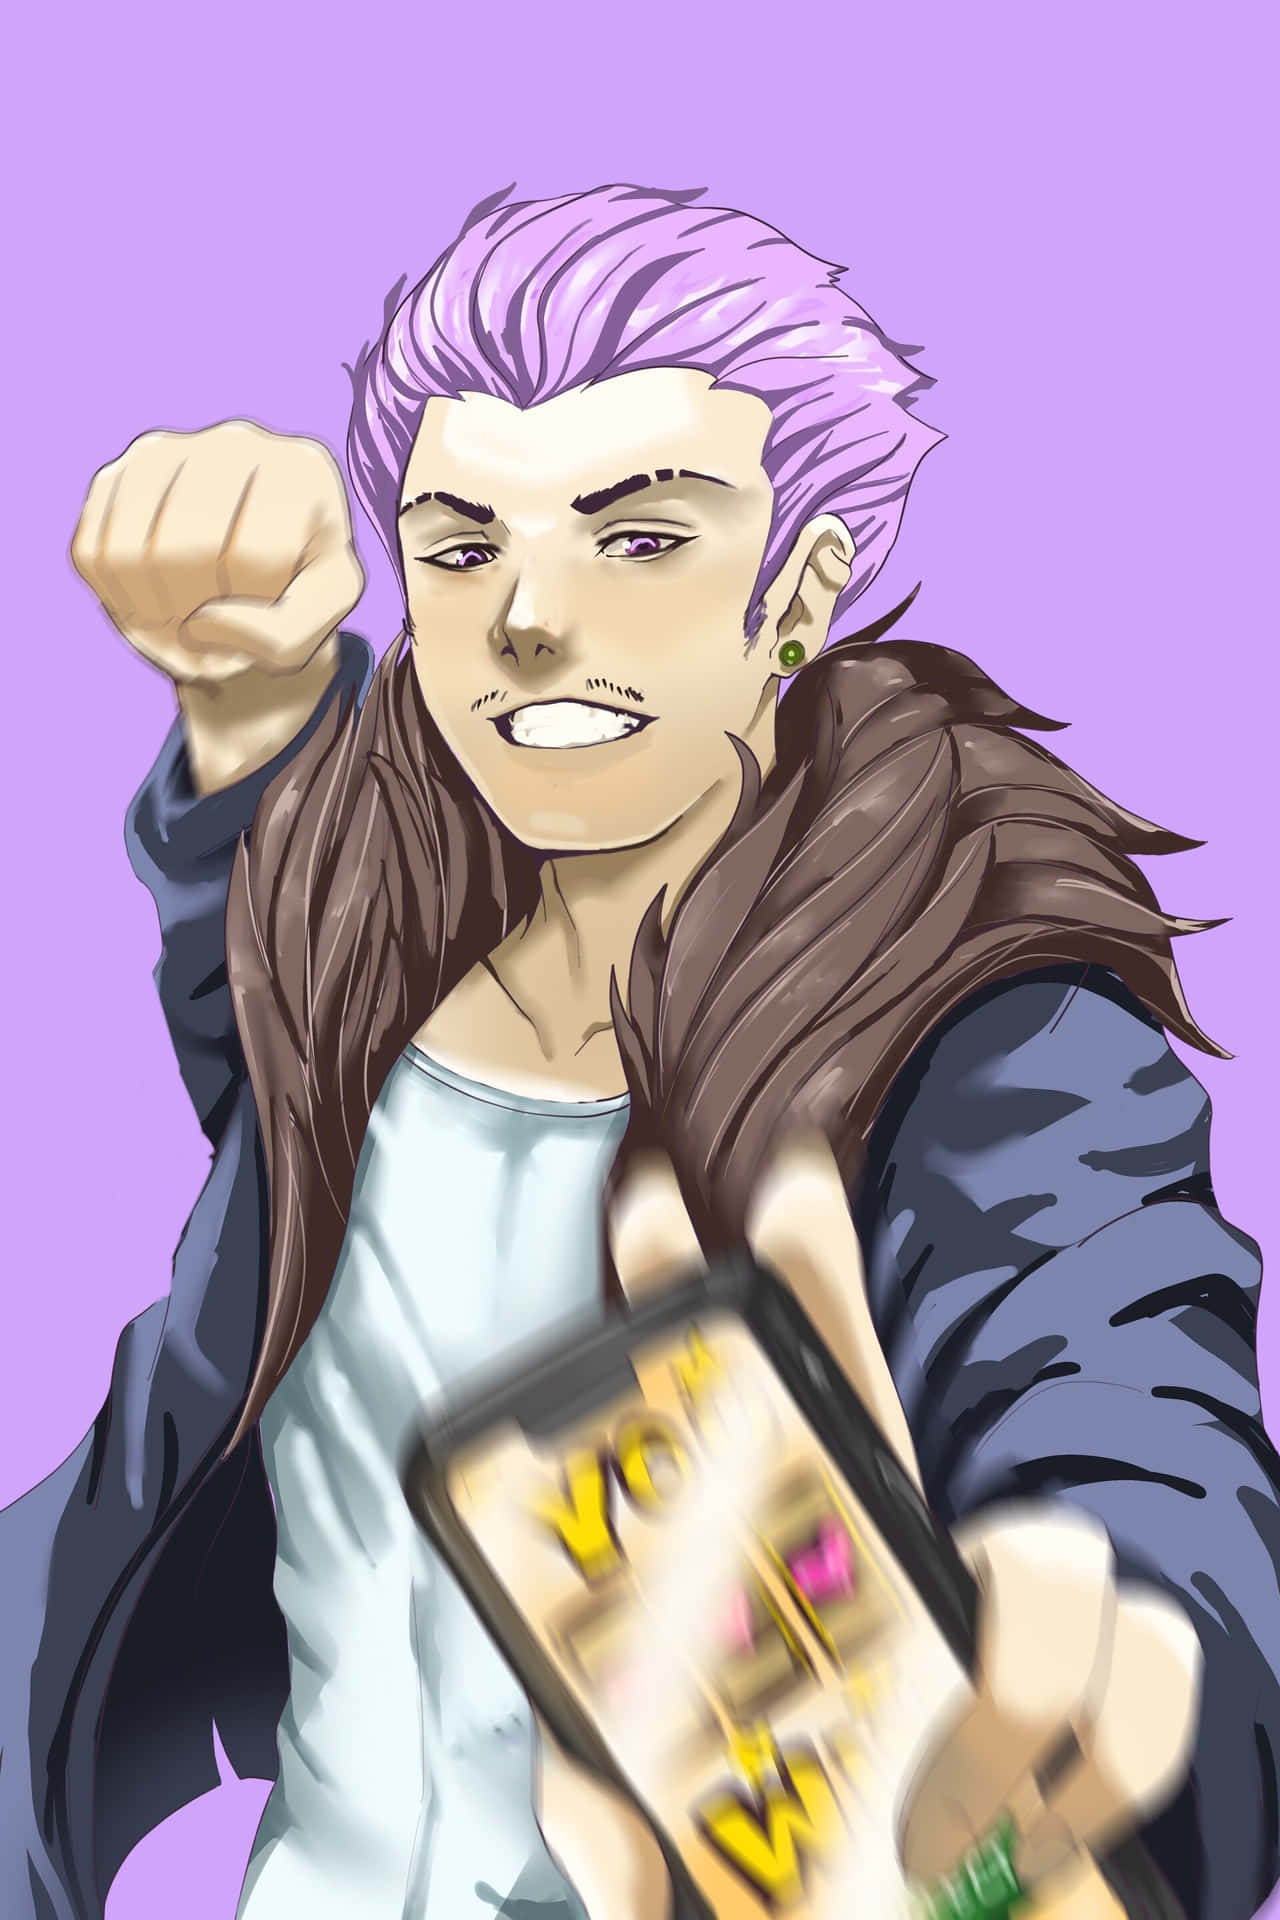 Animated Purple Haired Character Fist Pump Wallpaper